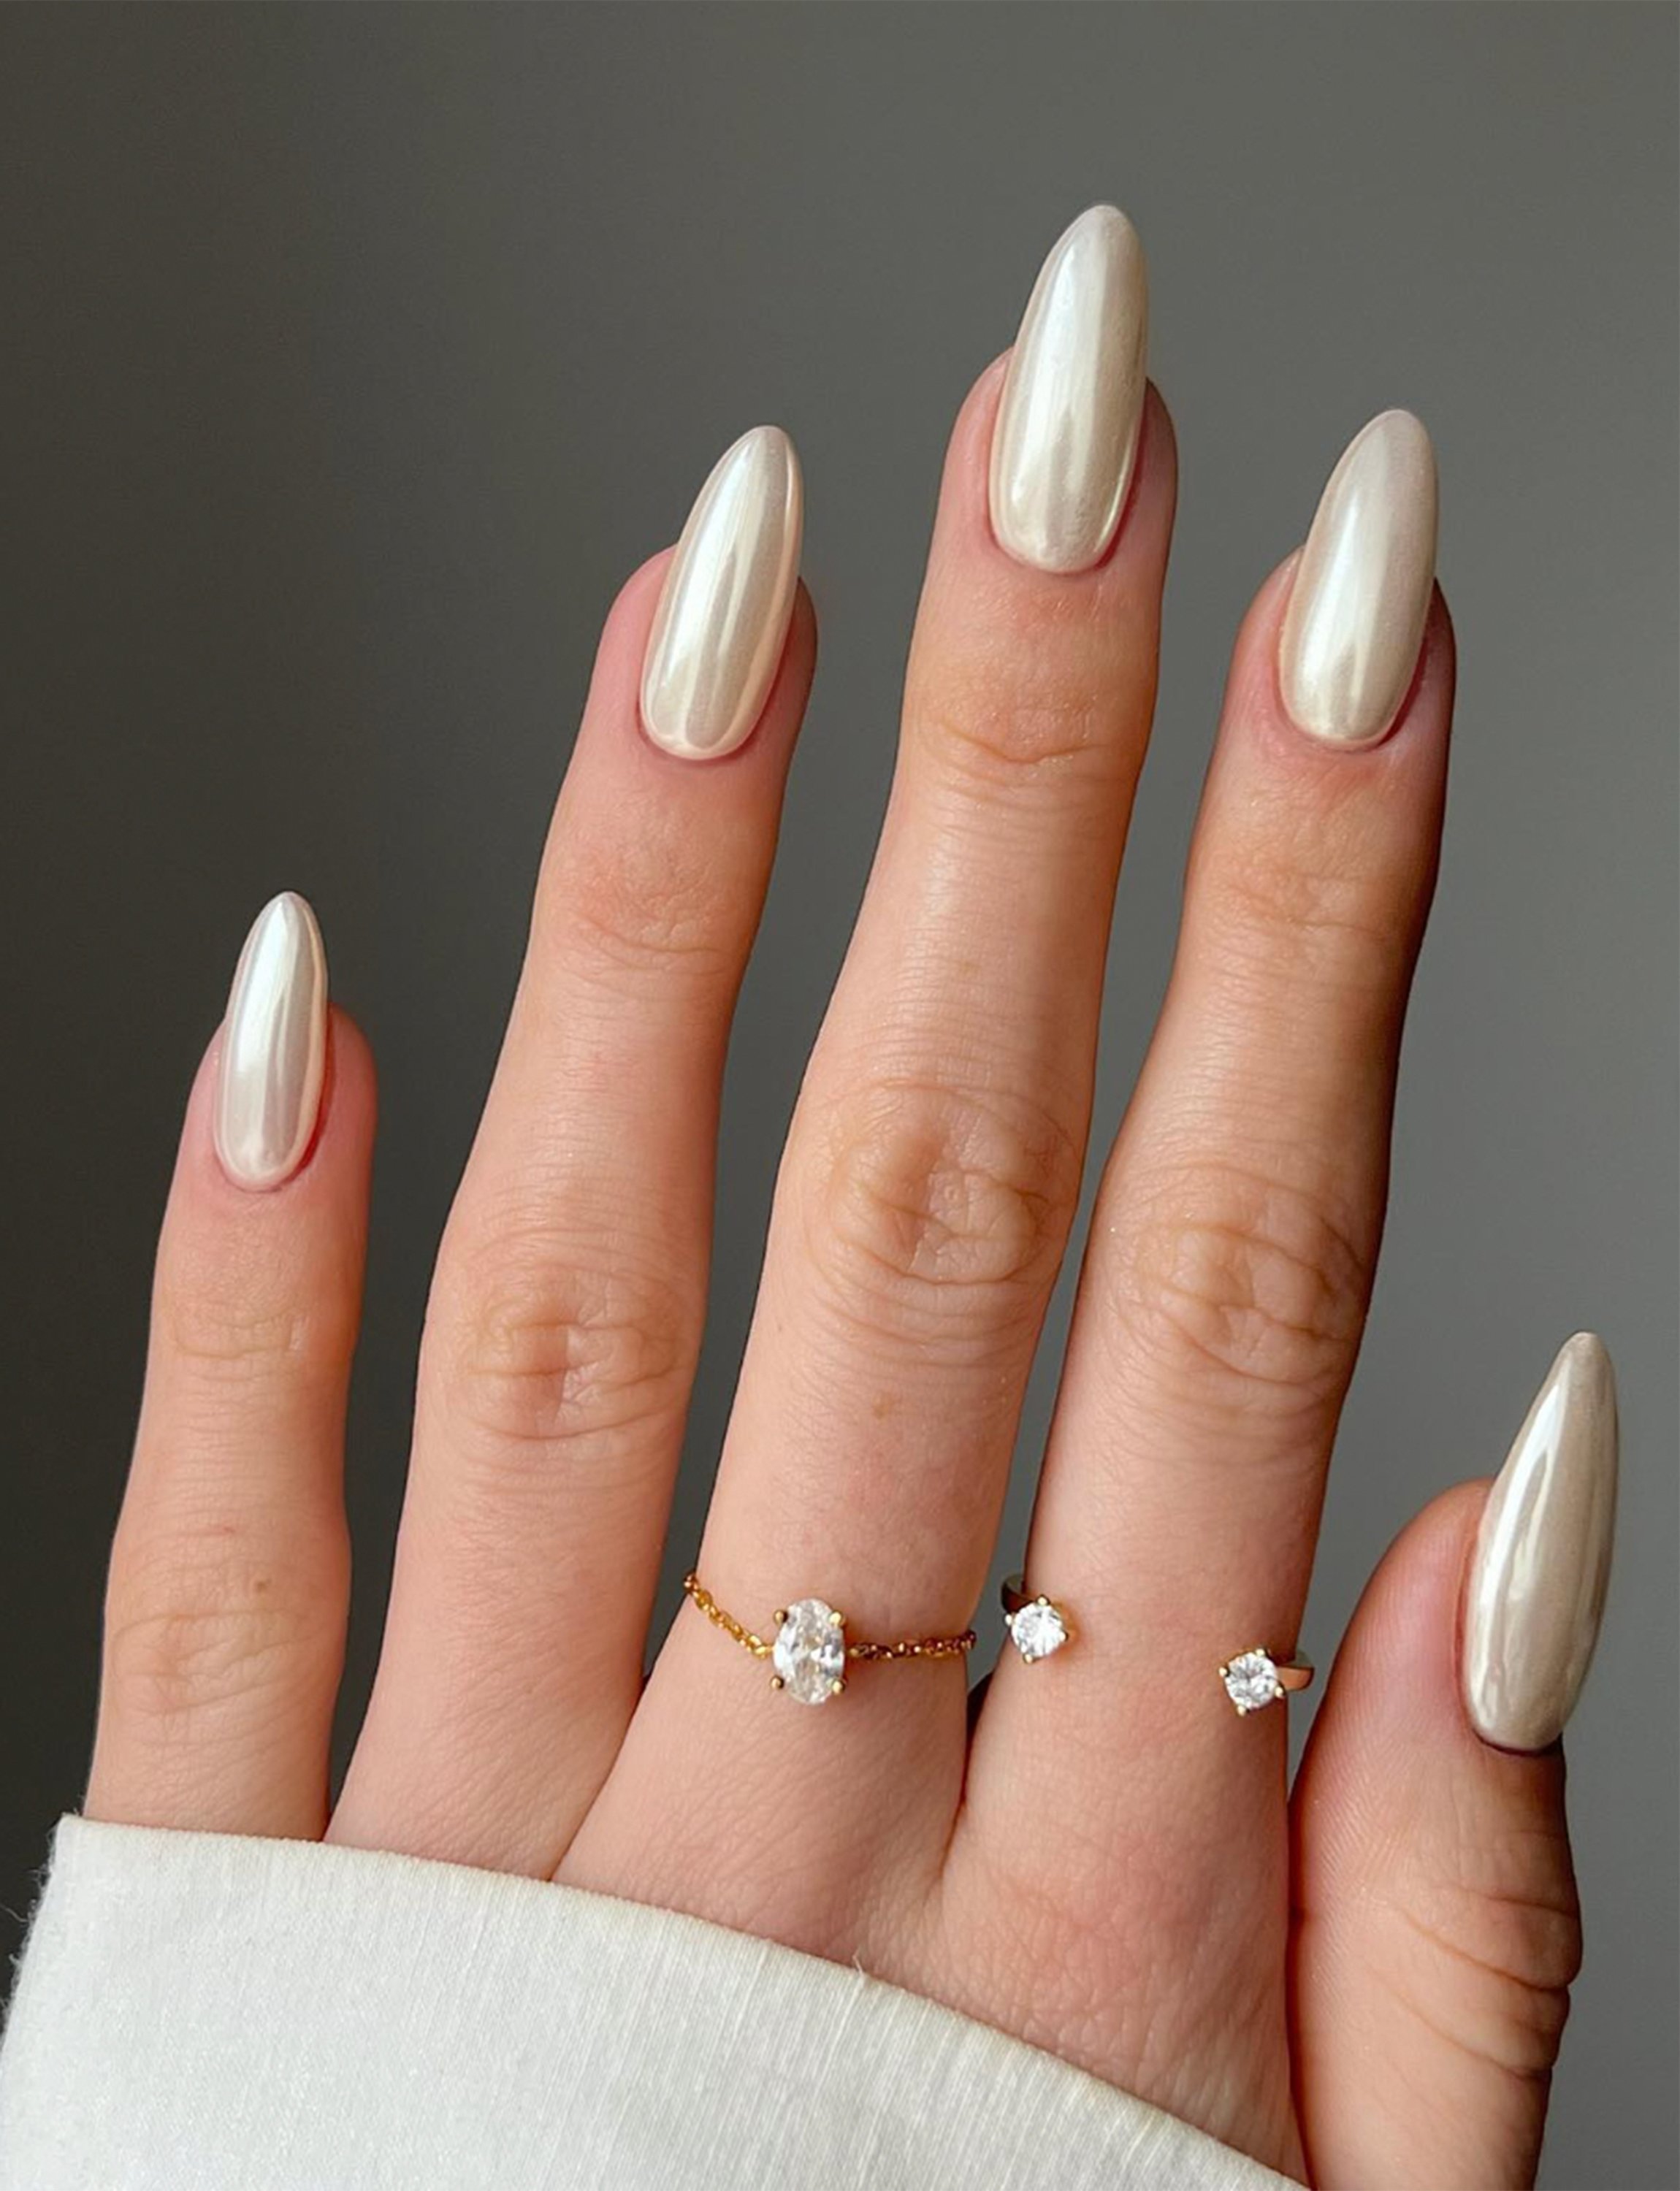 Read more about the article Vanilla Chrome Nails Are the Sweetest Spring Manicure Trend